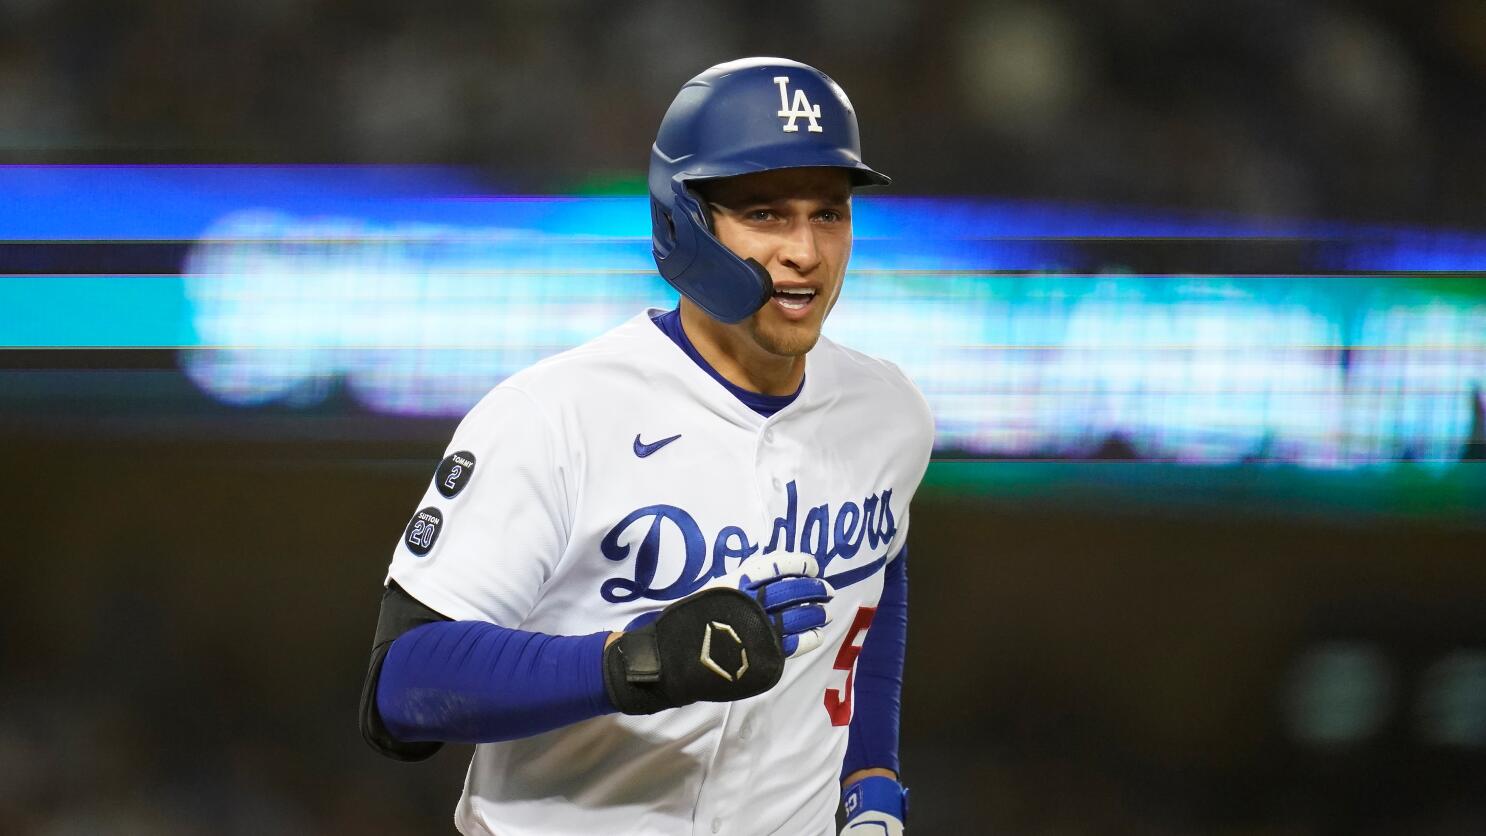 The Dodgers have agreed to a one-year, major league deal with